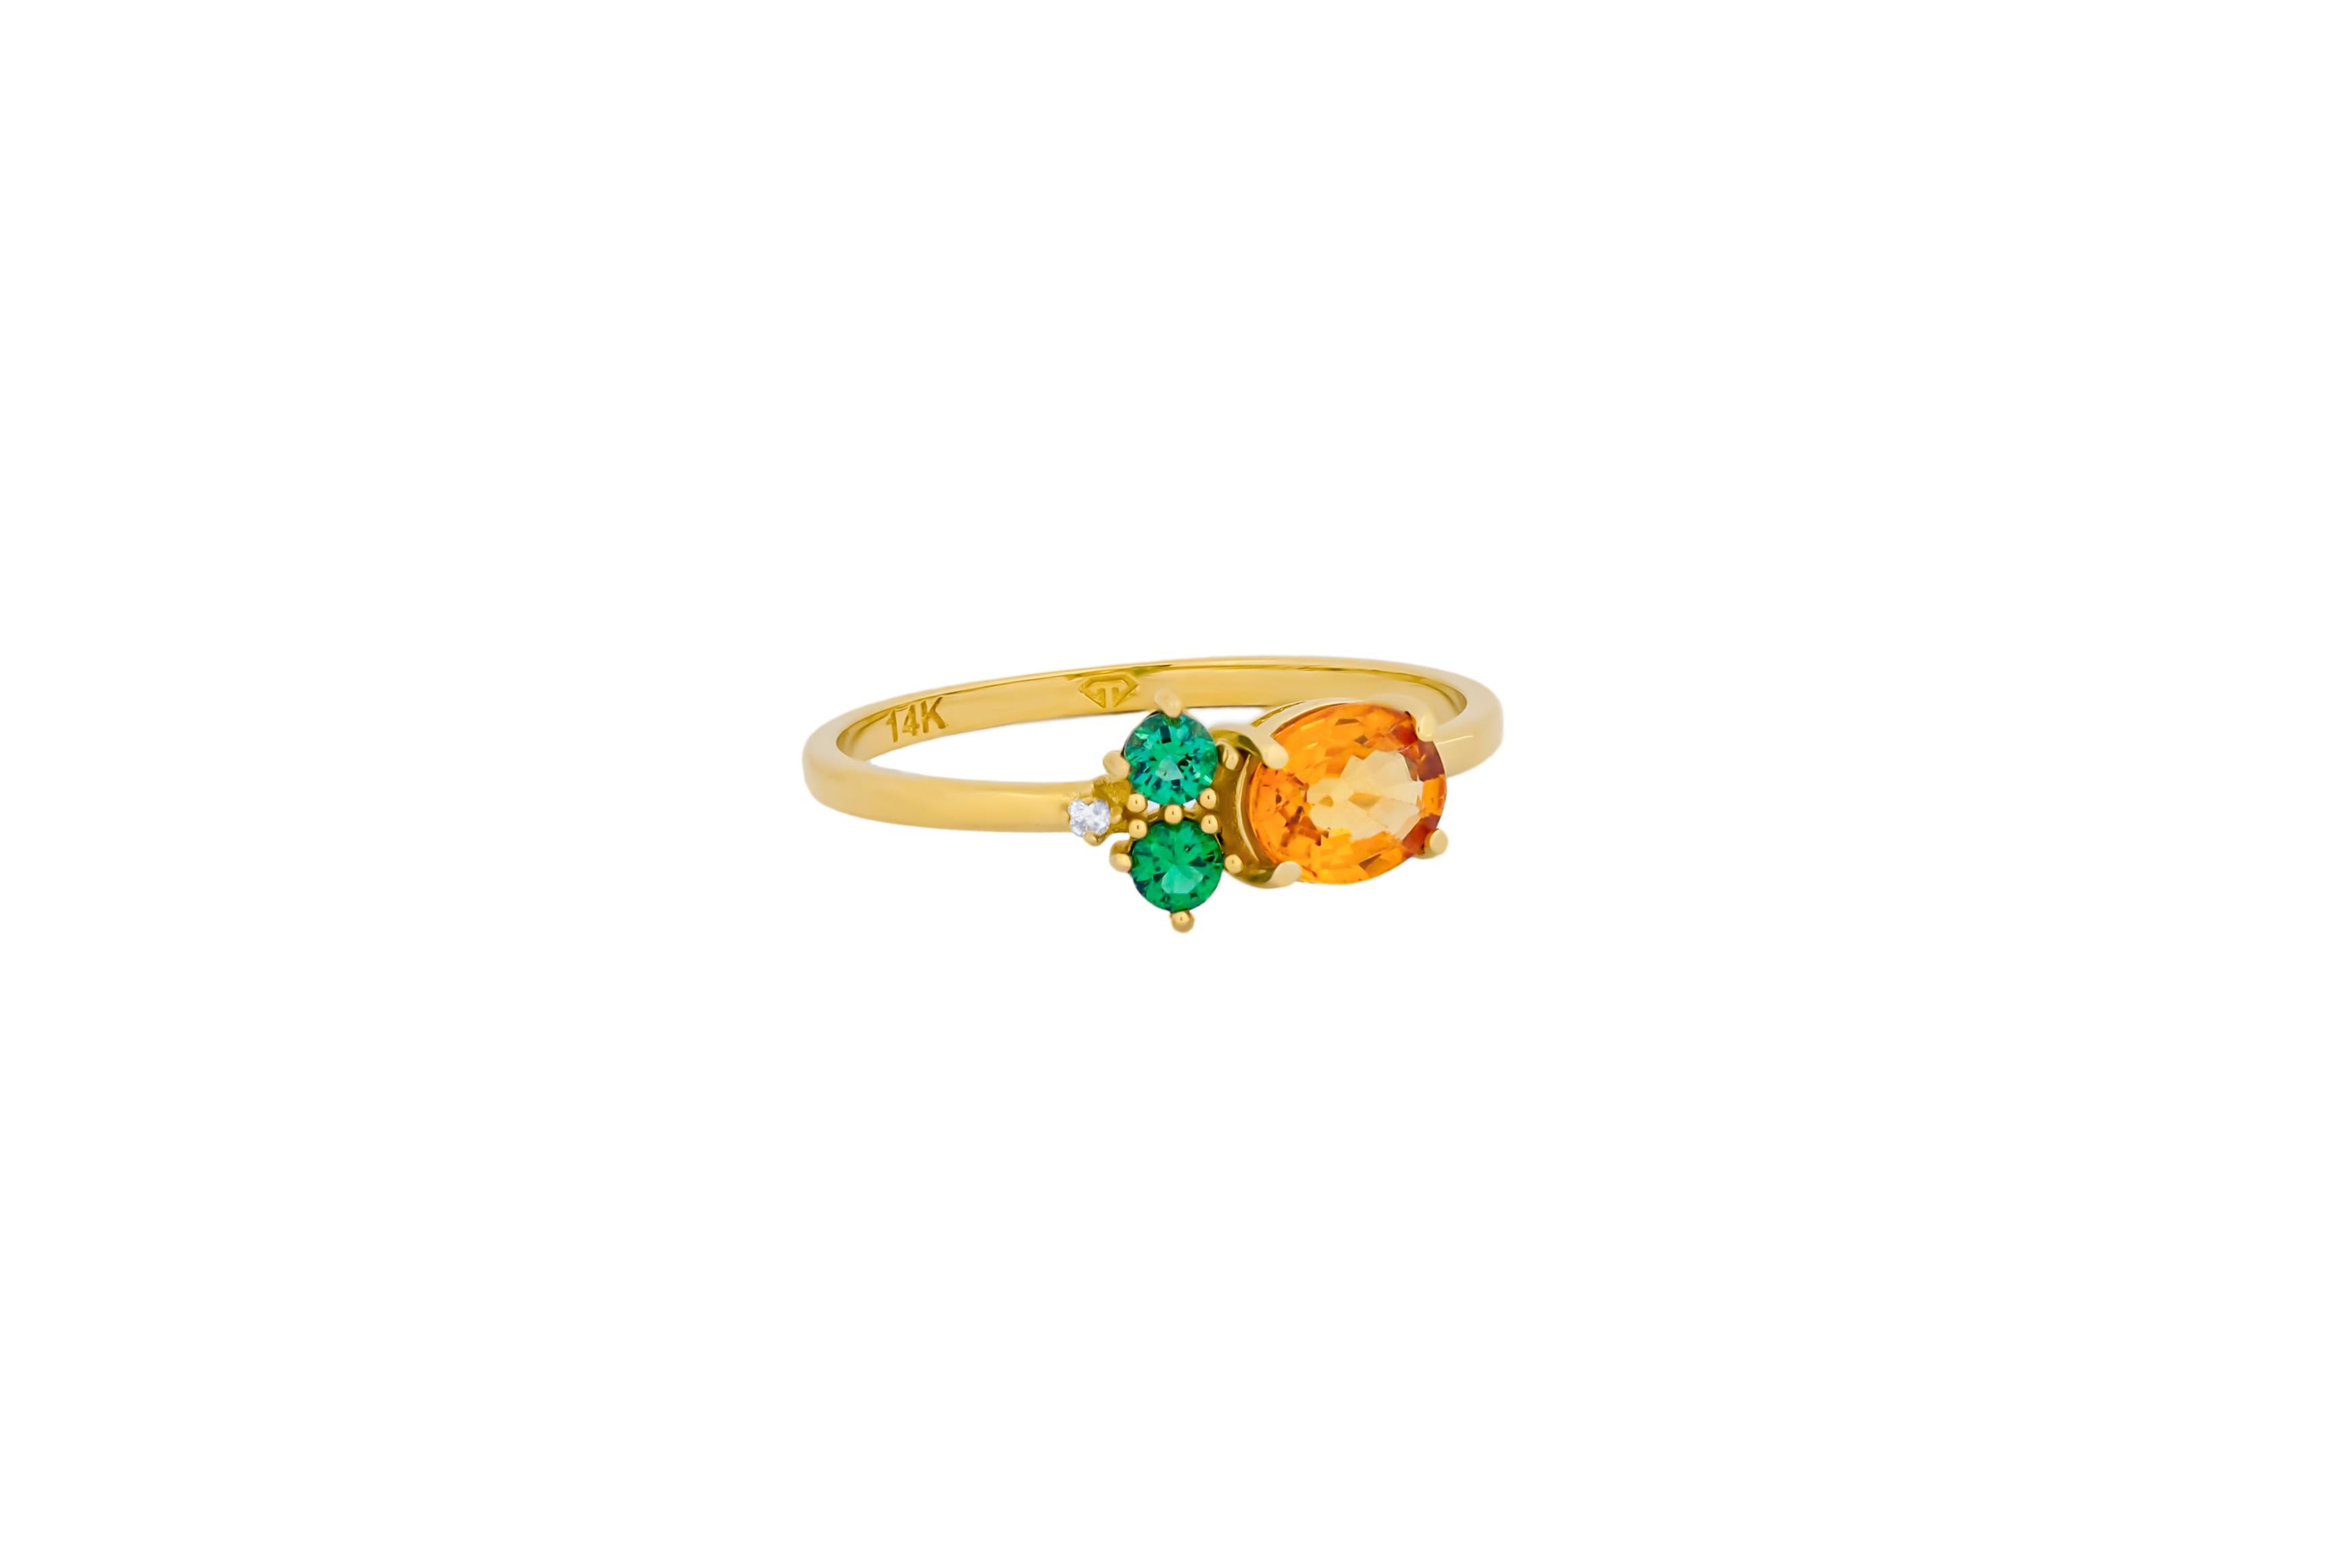 For Sale:  Oval sapphire, tsavorite and diamonds 14k gold ring. 7